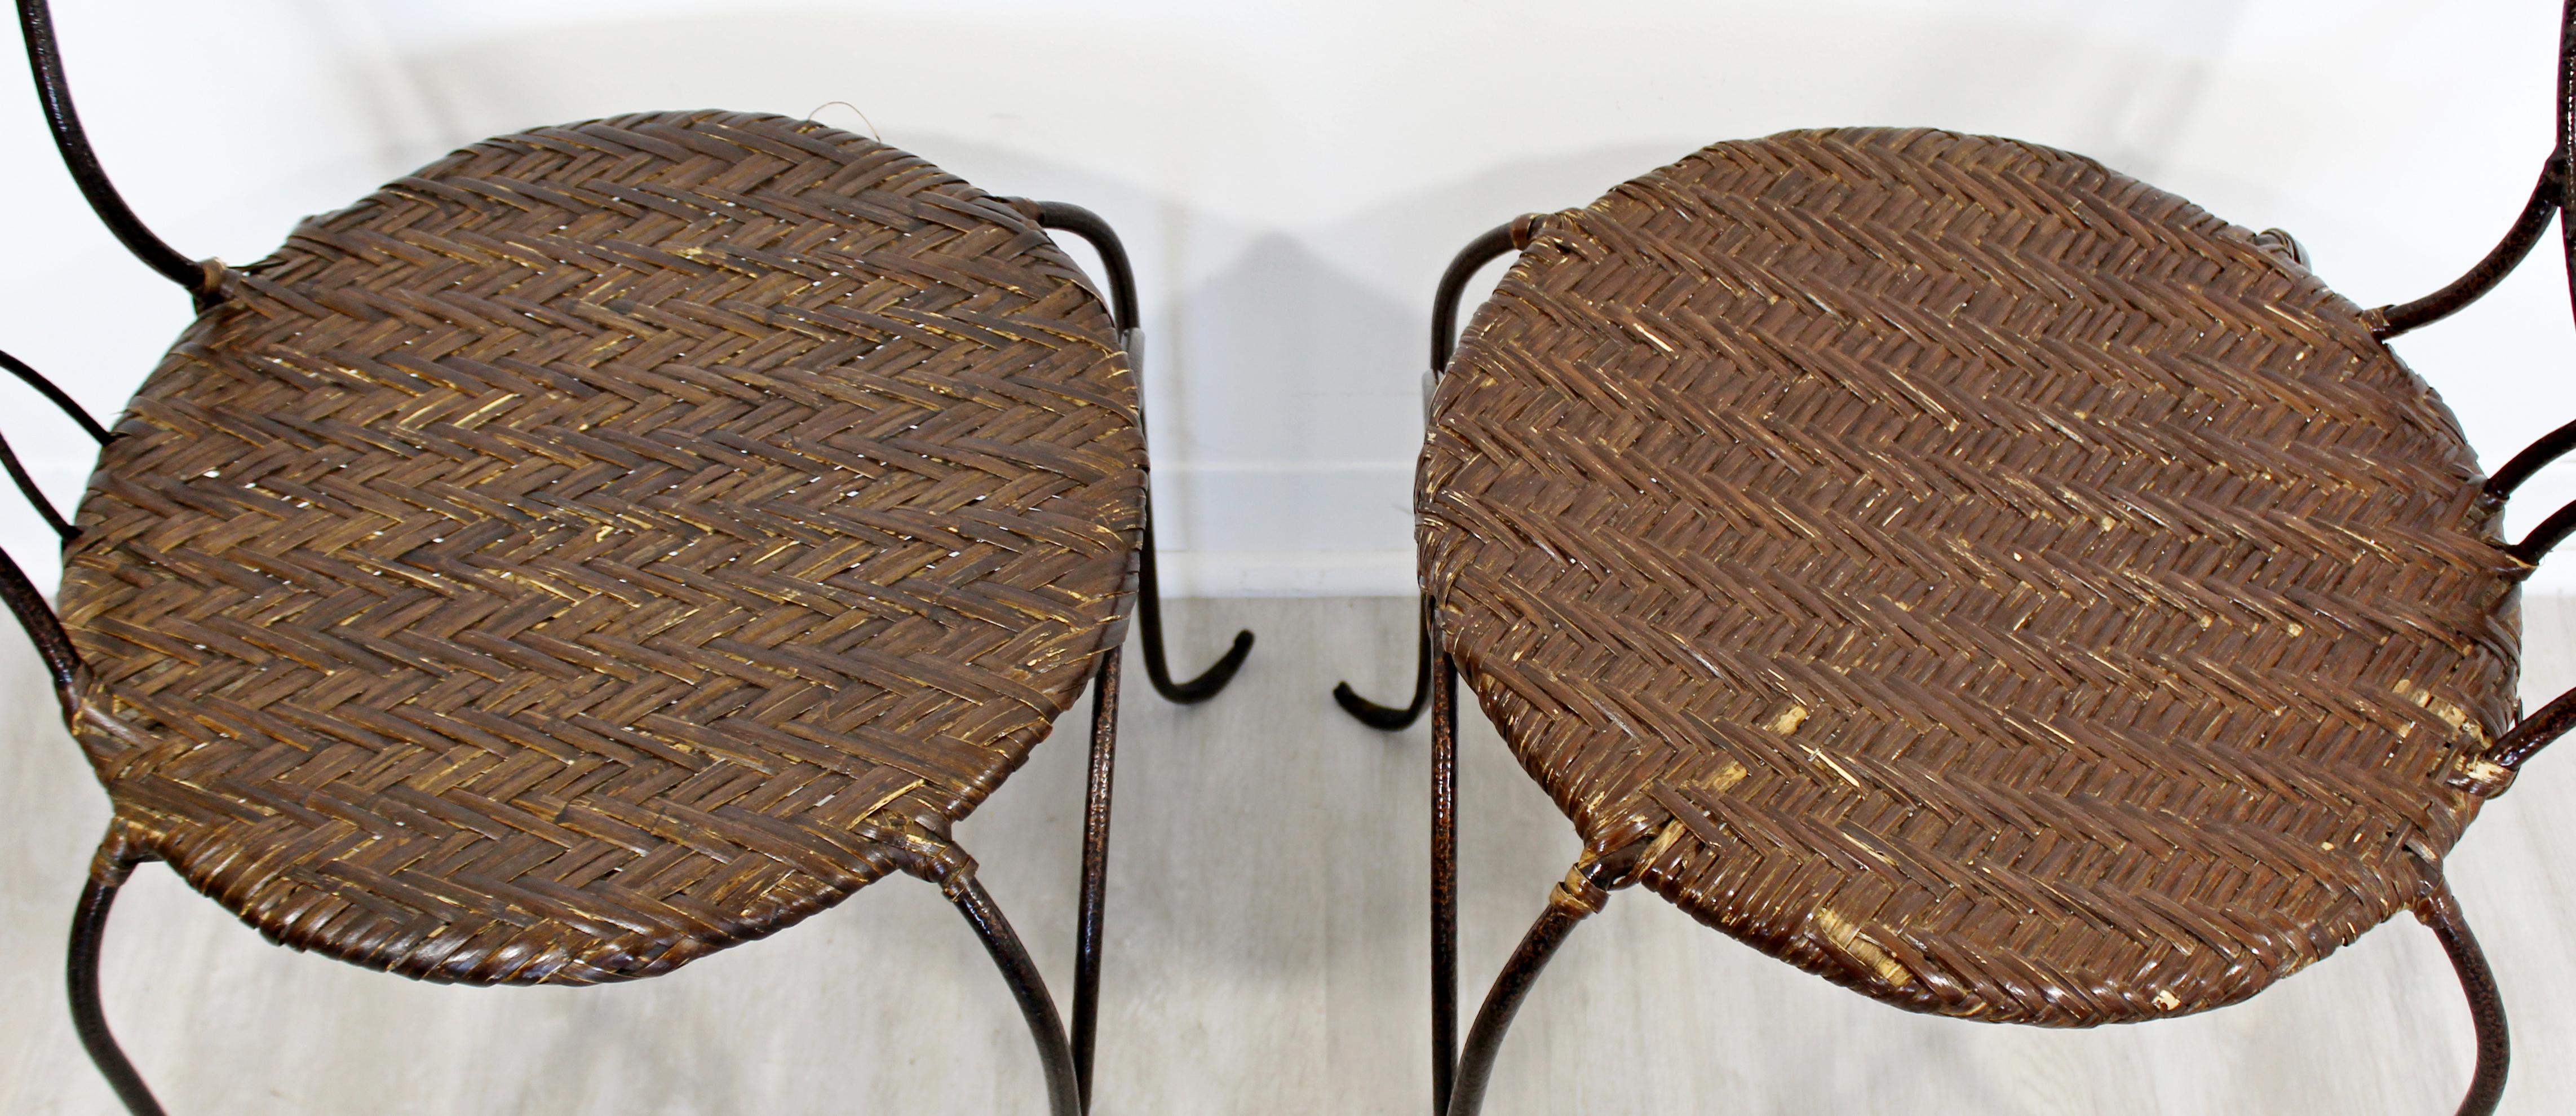 Late 20th Century Contemporary Modern Pair of Wrought Iron and Rattan Cafe Art Chairs Faces, 1990s